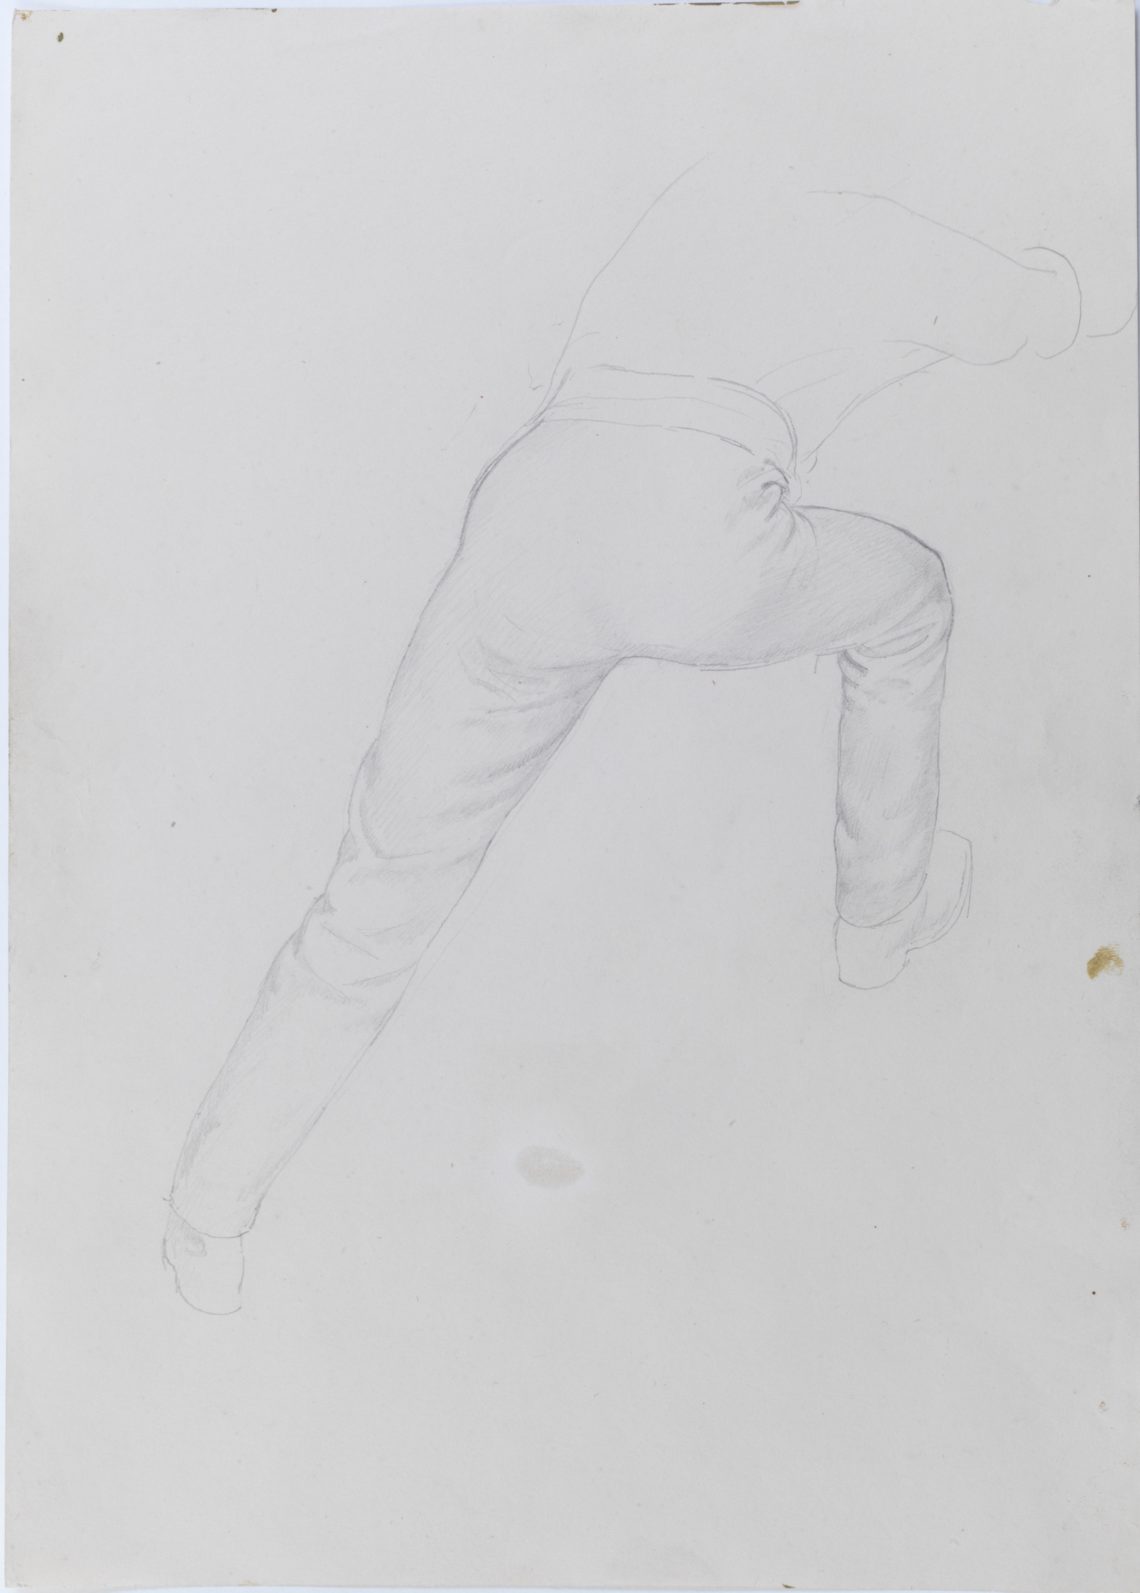 Henry_Lamb_Sketch-for-figure-in-advance-dressing-station-on-the-struma-1916-C15, 35.3 x 25.3cm